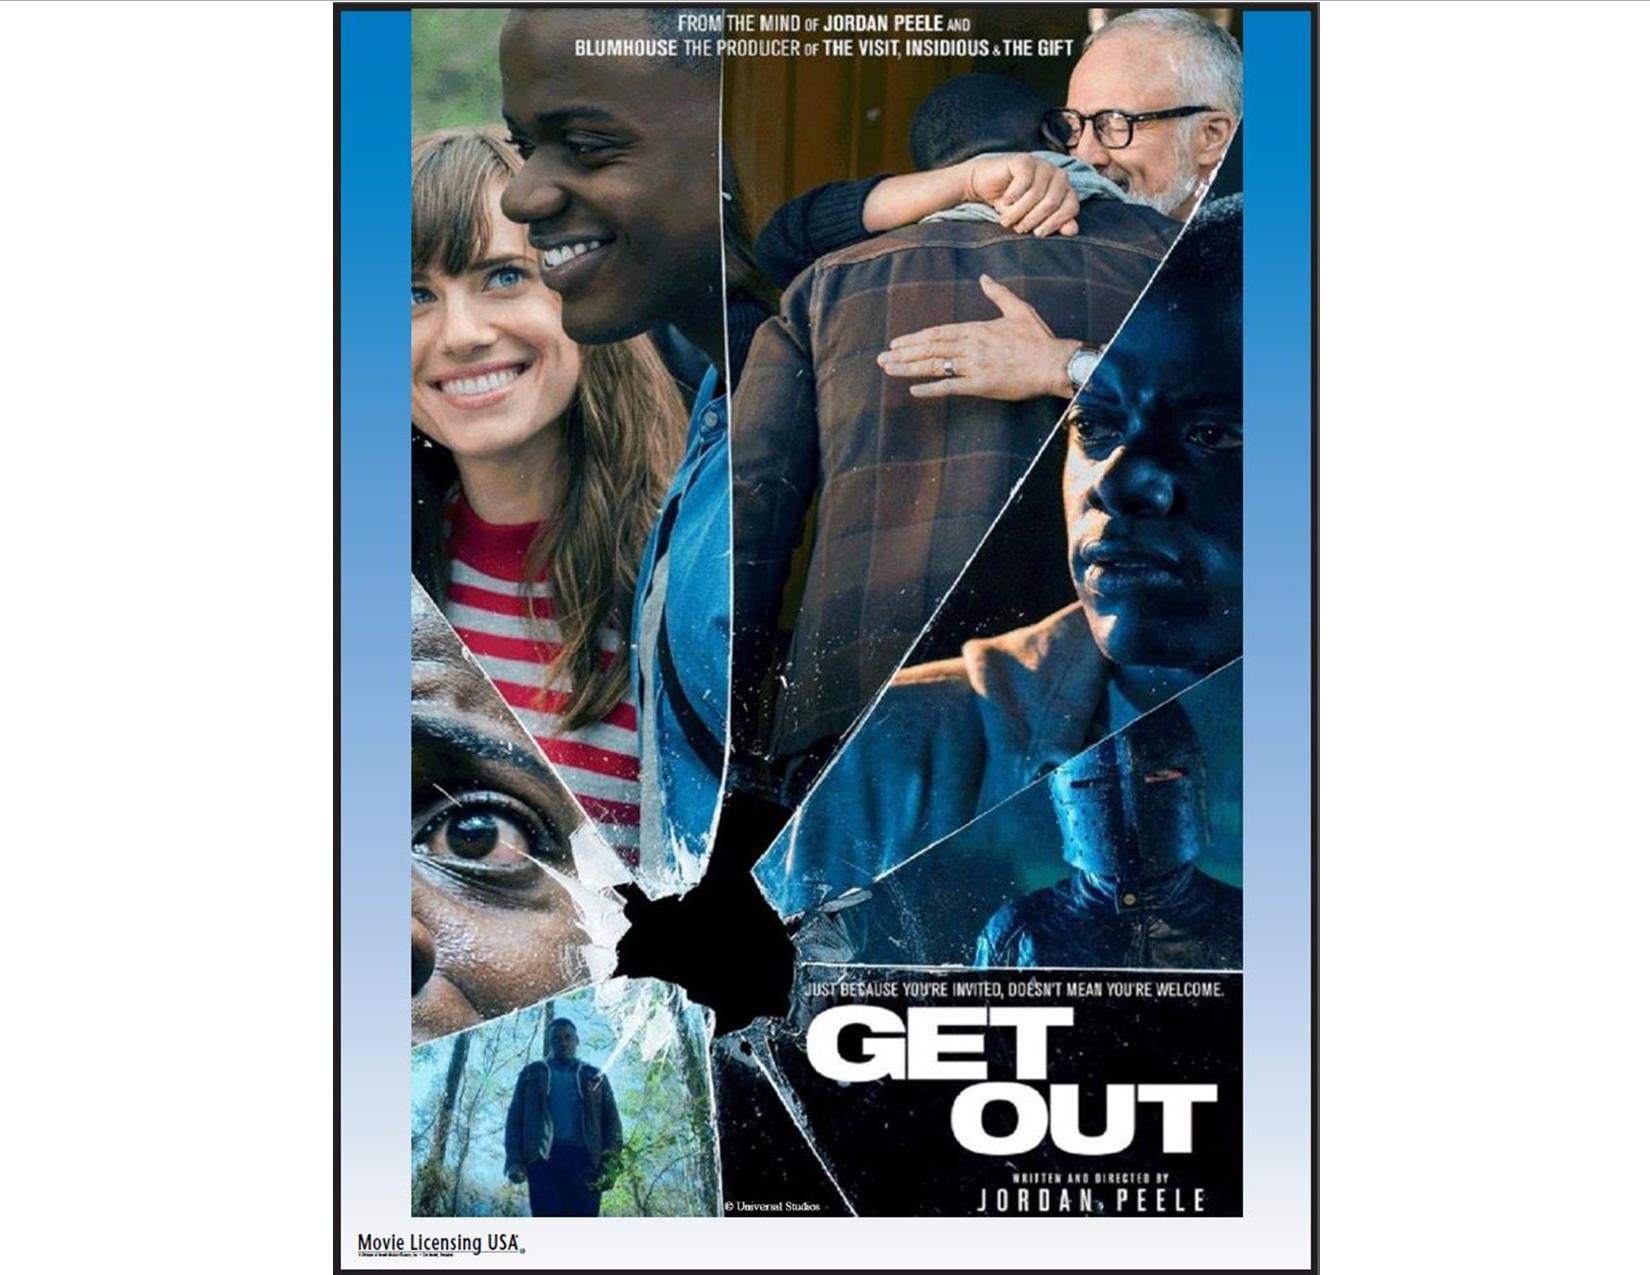 Get Out movie poster featuring various scenes from the film with a shattered glass motif